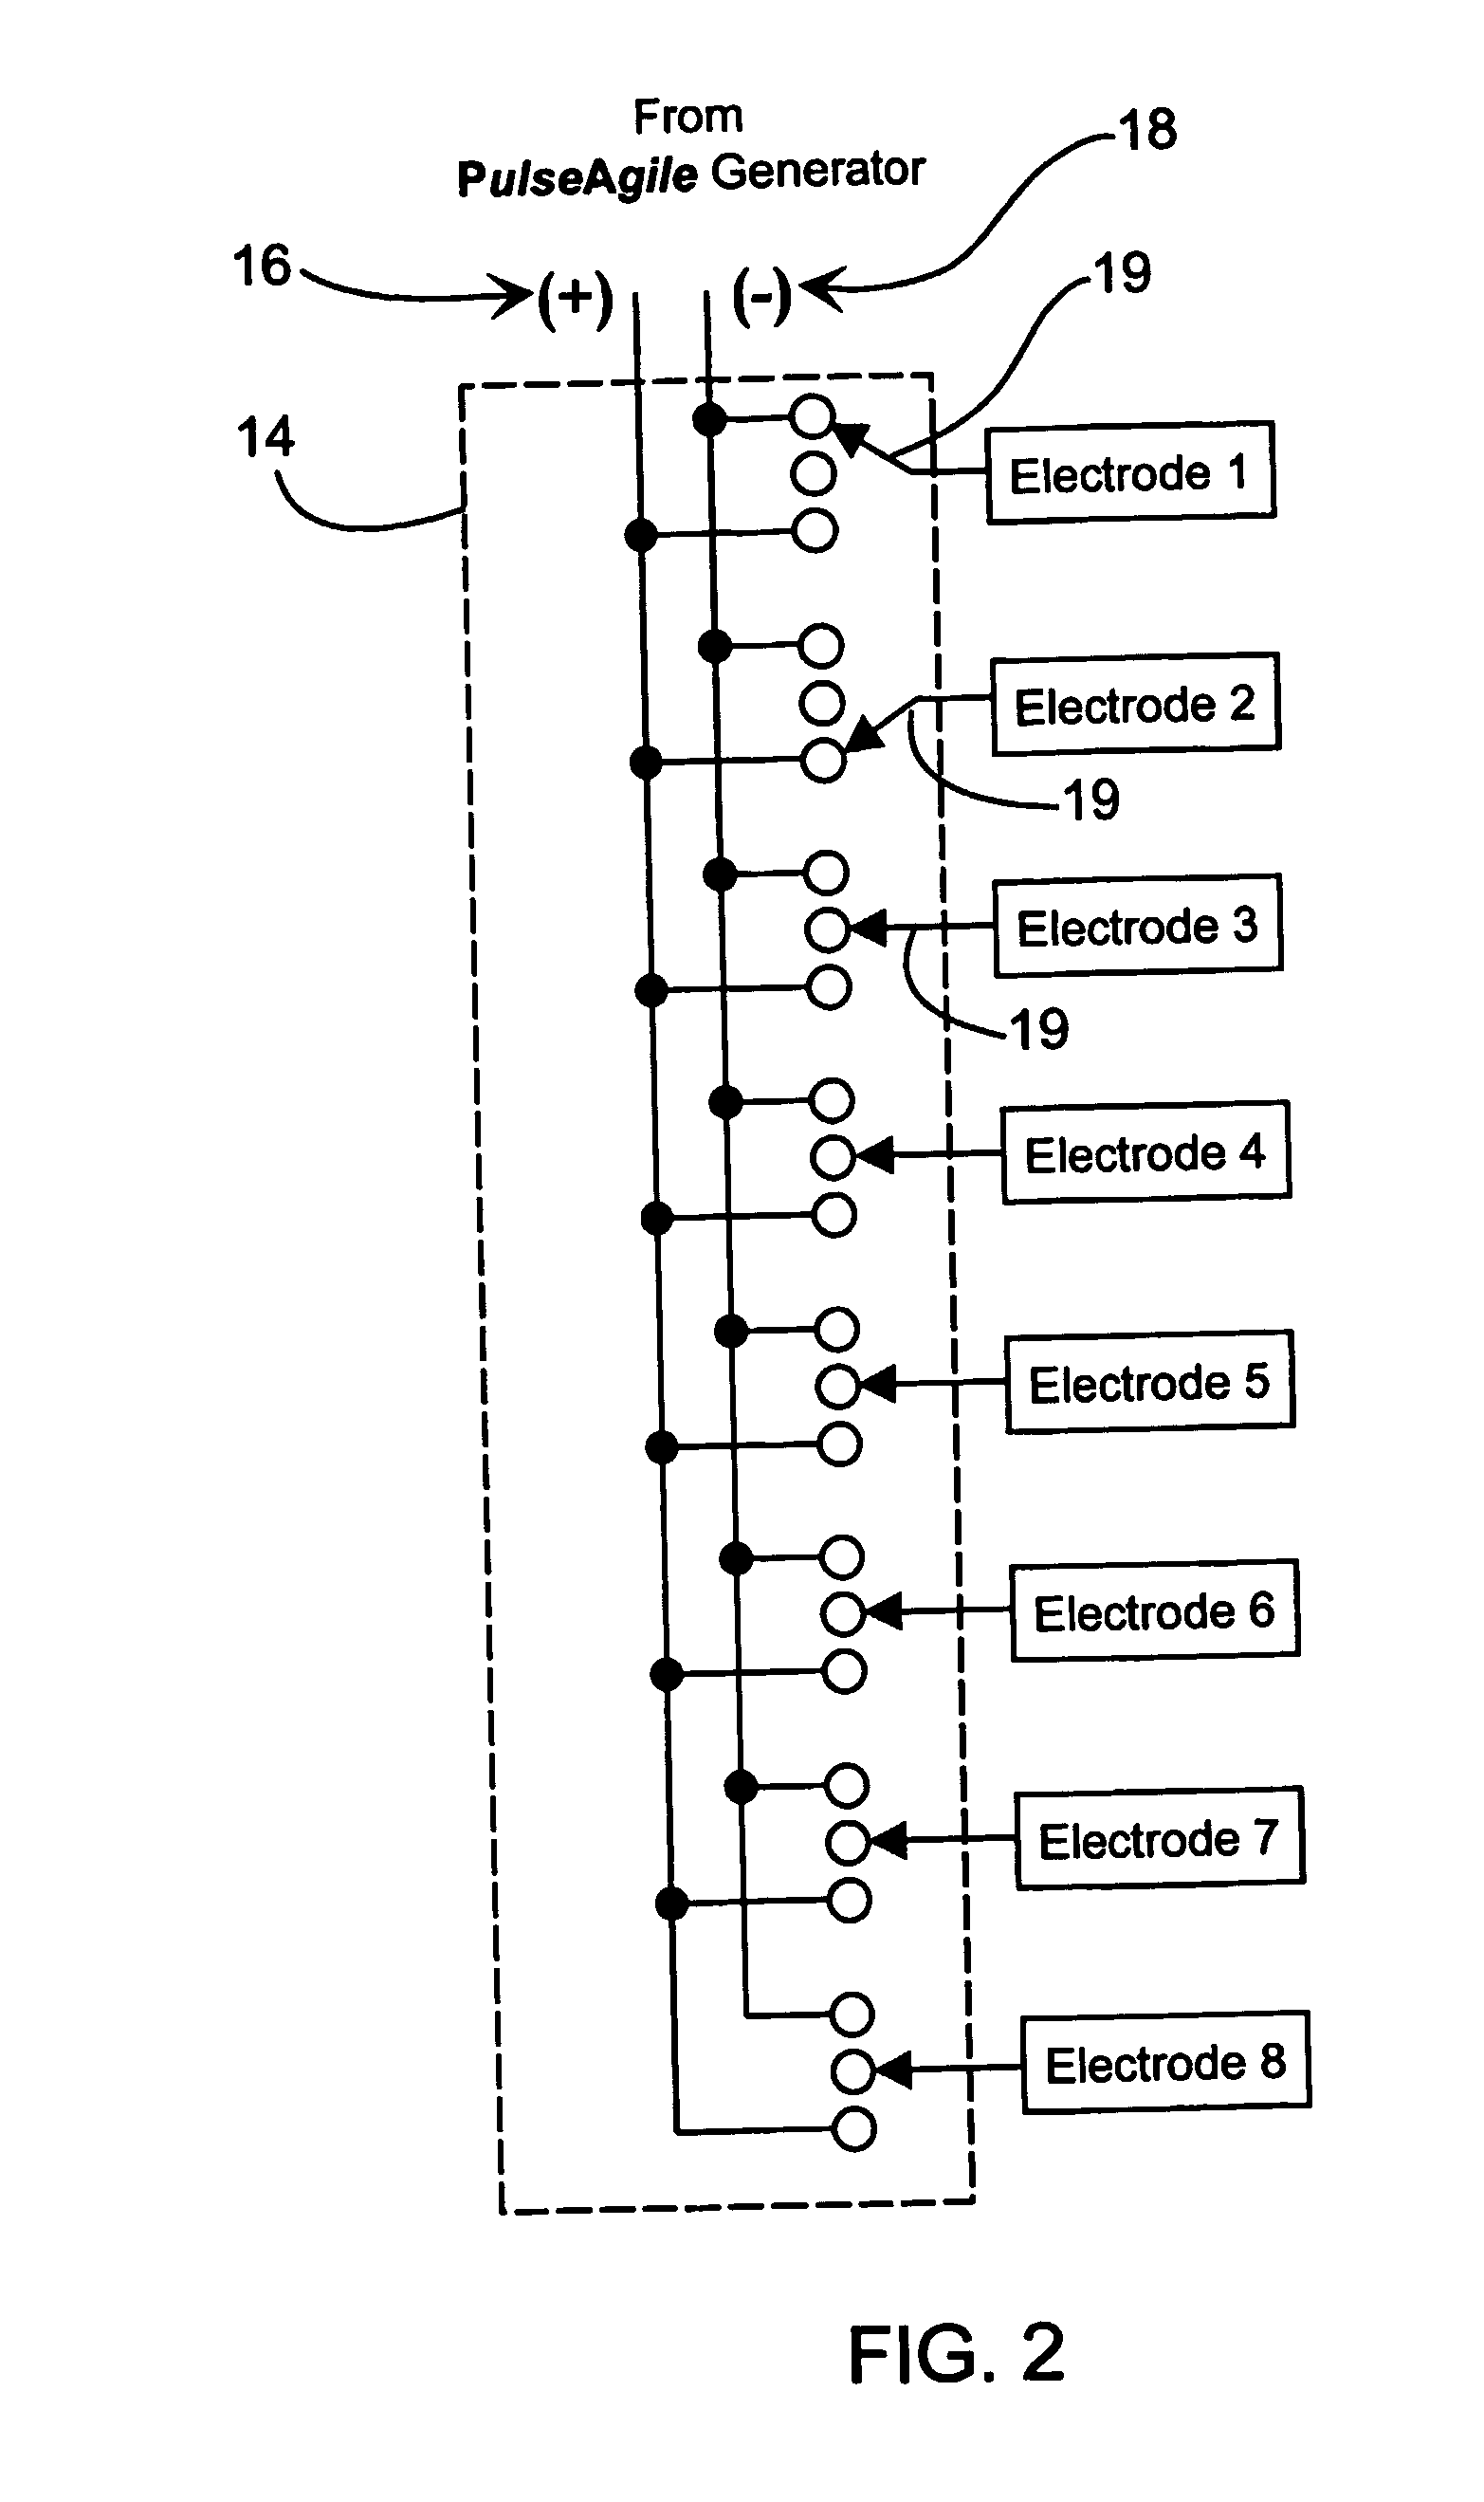 Method of treating biological materials with translating electrical fields and electrode polarity reversal